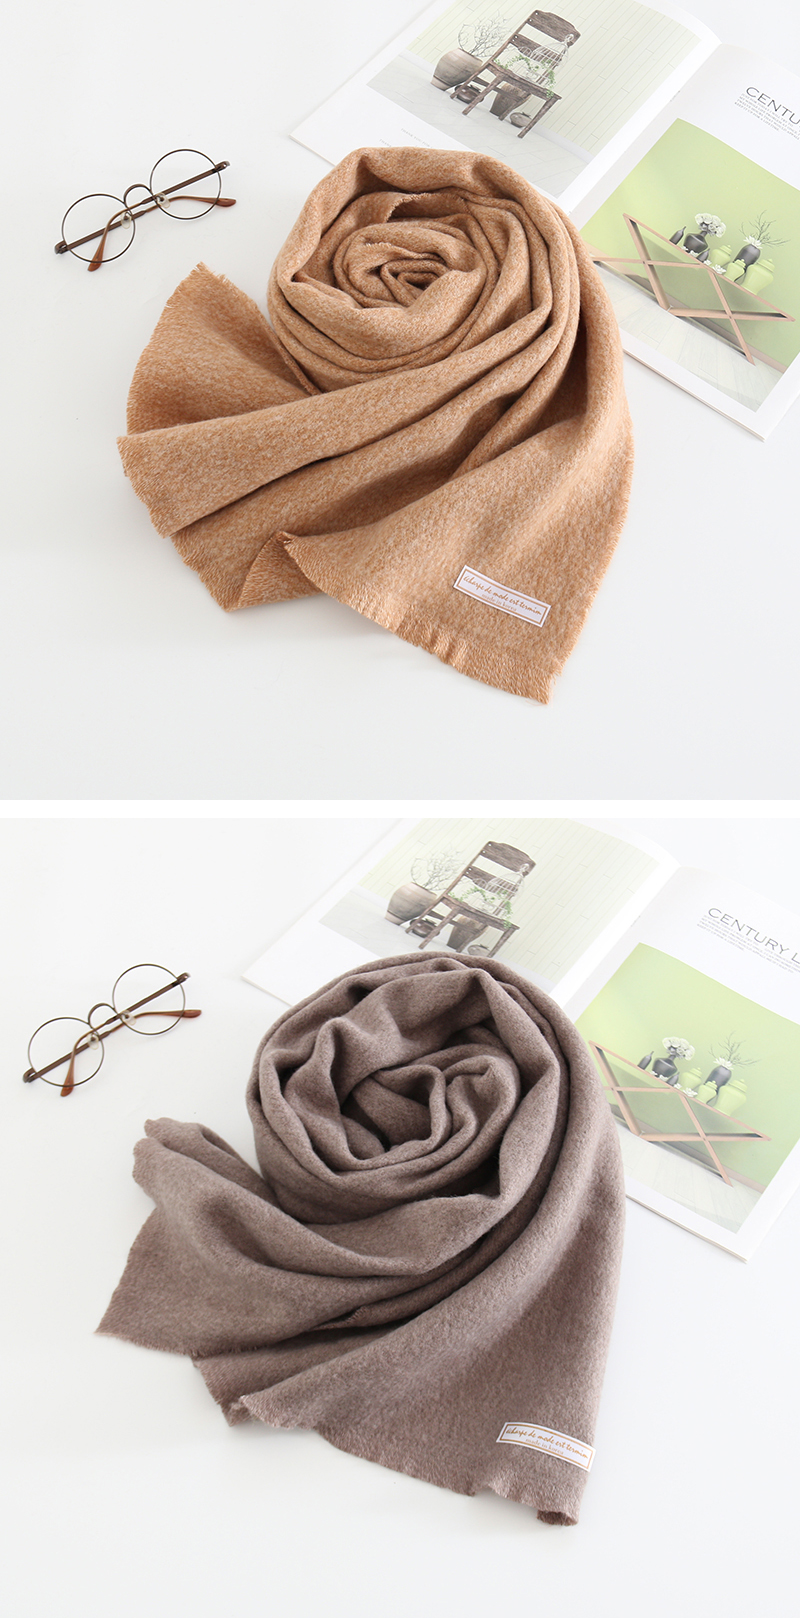 Fashion Camel Letter Clip Flower Monochrome Imitation Cashmere Loose Scarf,Thin Scaves